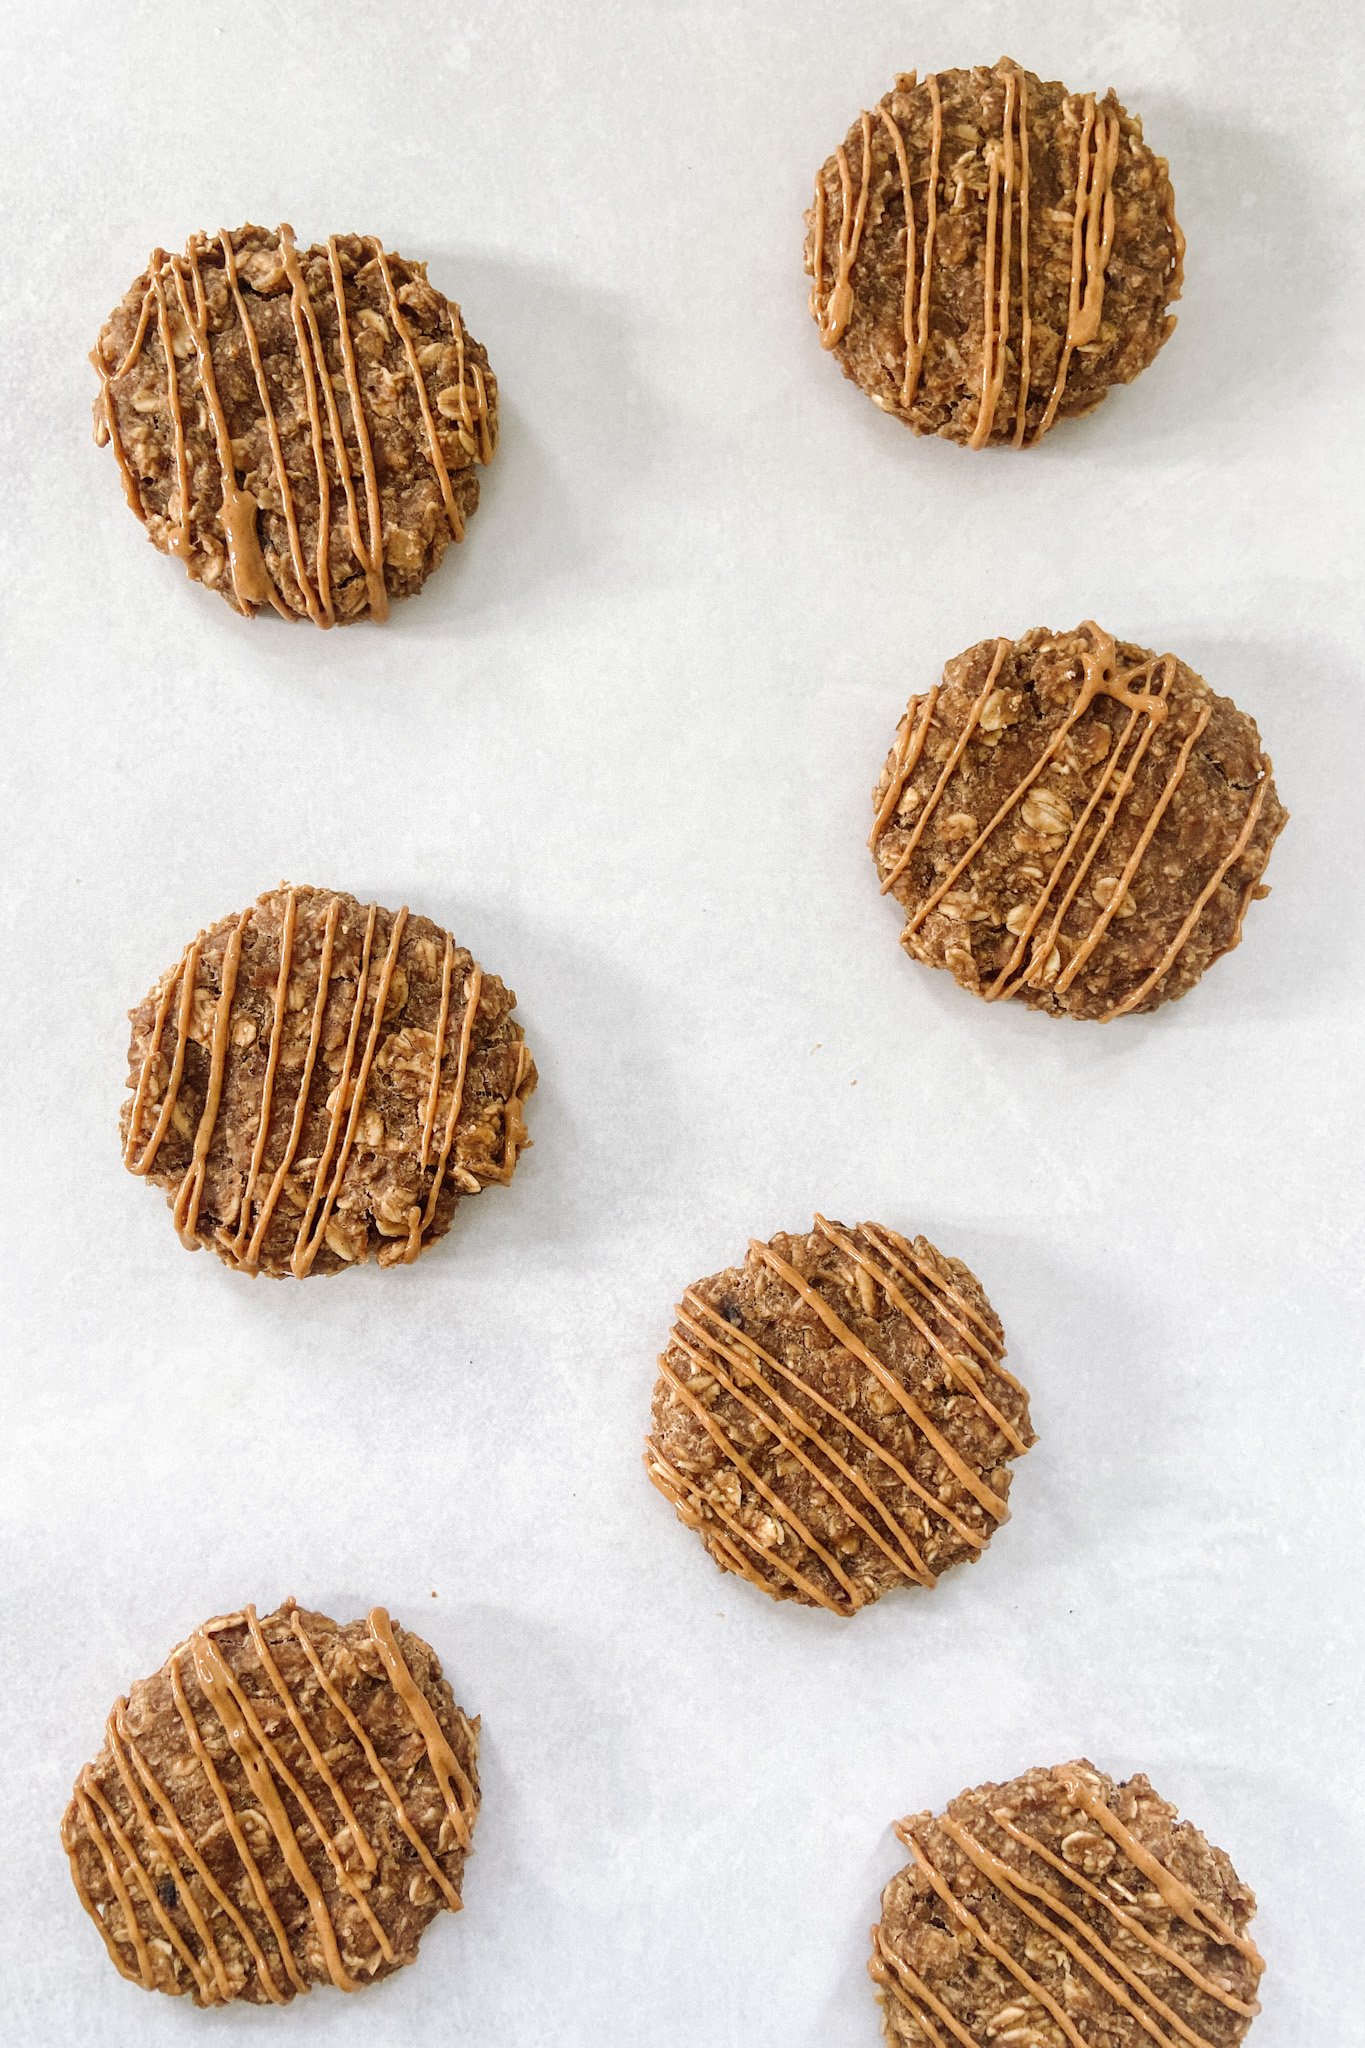 Peanut butter cookies with a drizzle of peanut butter on top